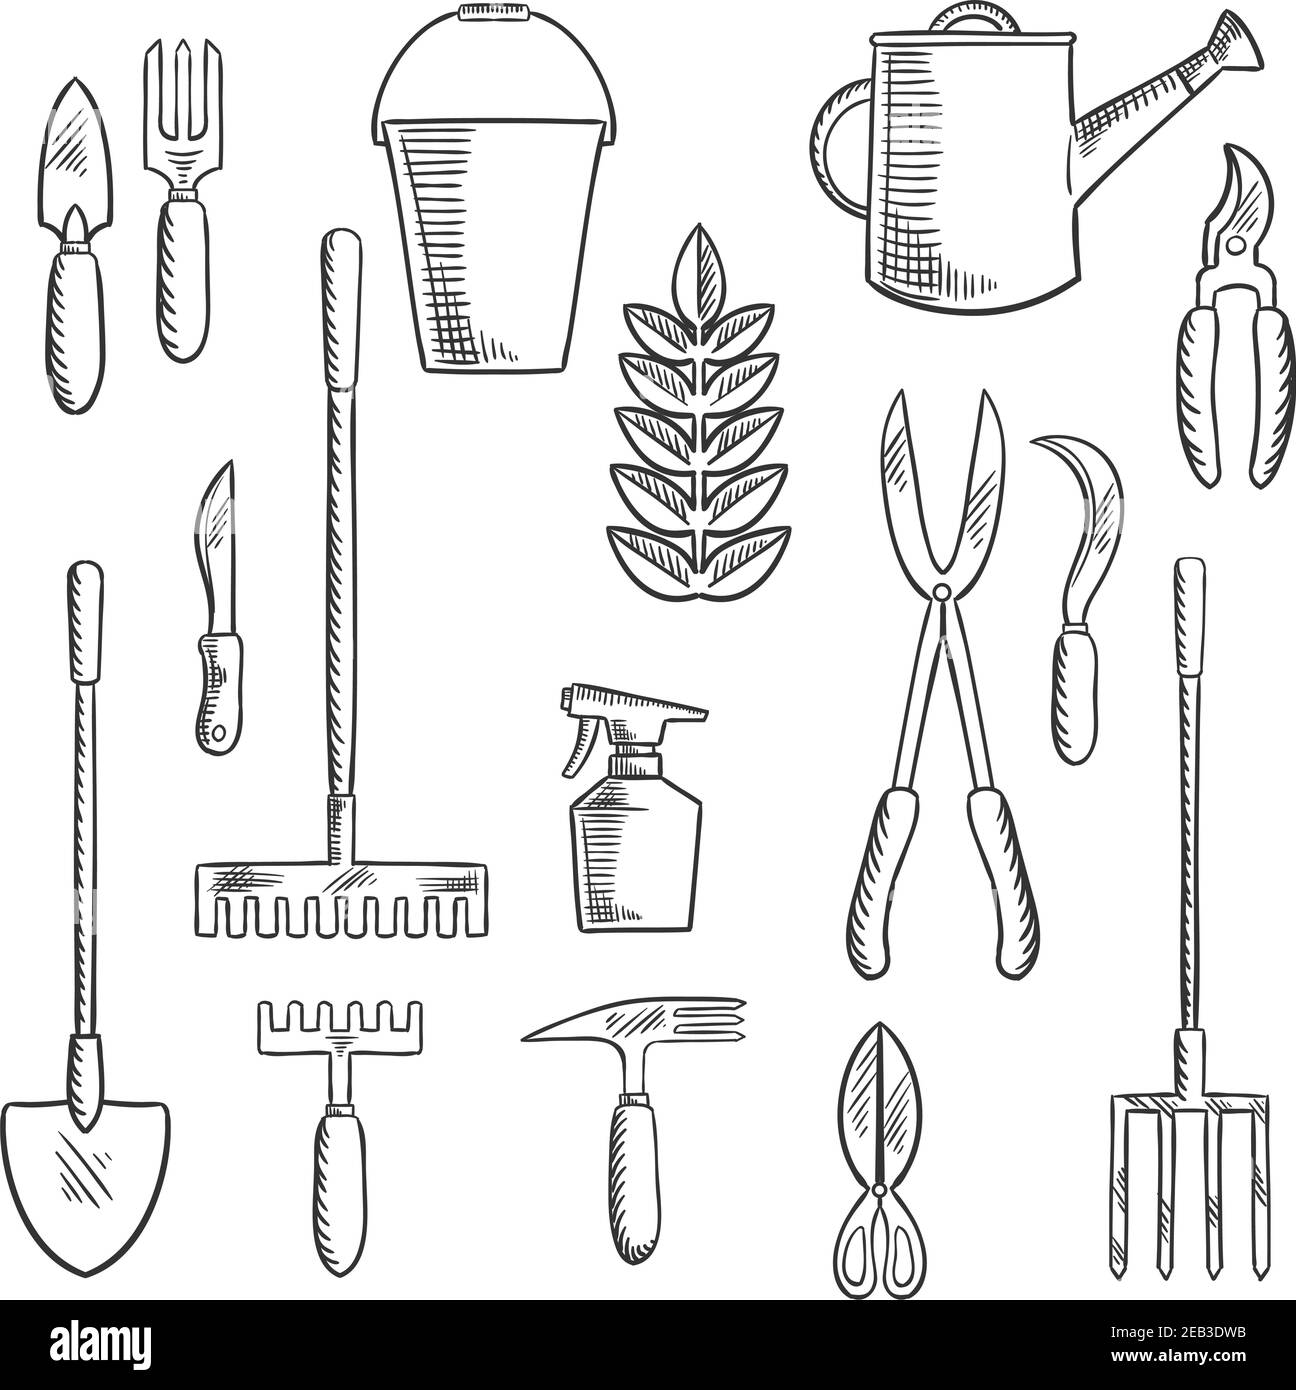 Hand gardening tools sketched icons with trowel, knife, fork, shears, rake, scissors, spray bottle, weeding hoe, sickle and watering can. Sketch style Stock Vector